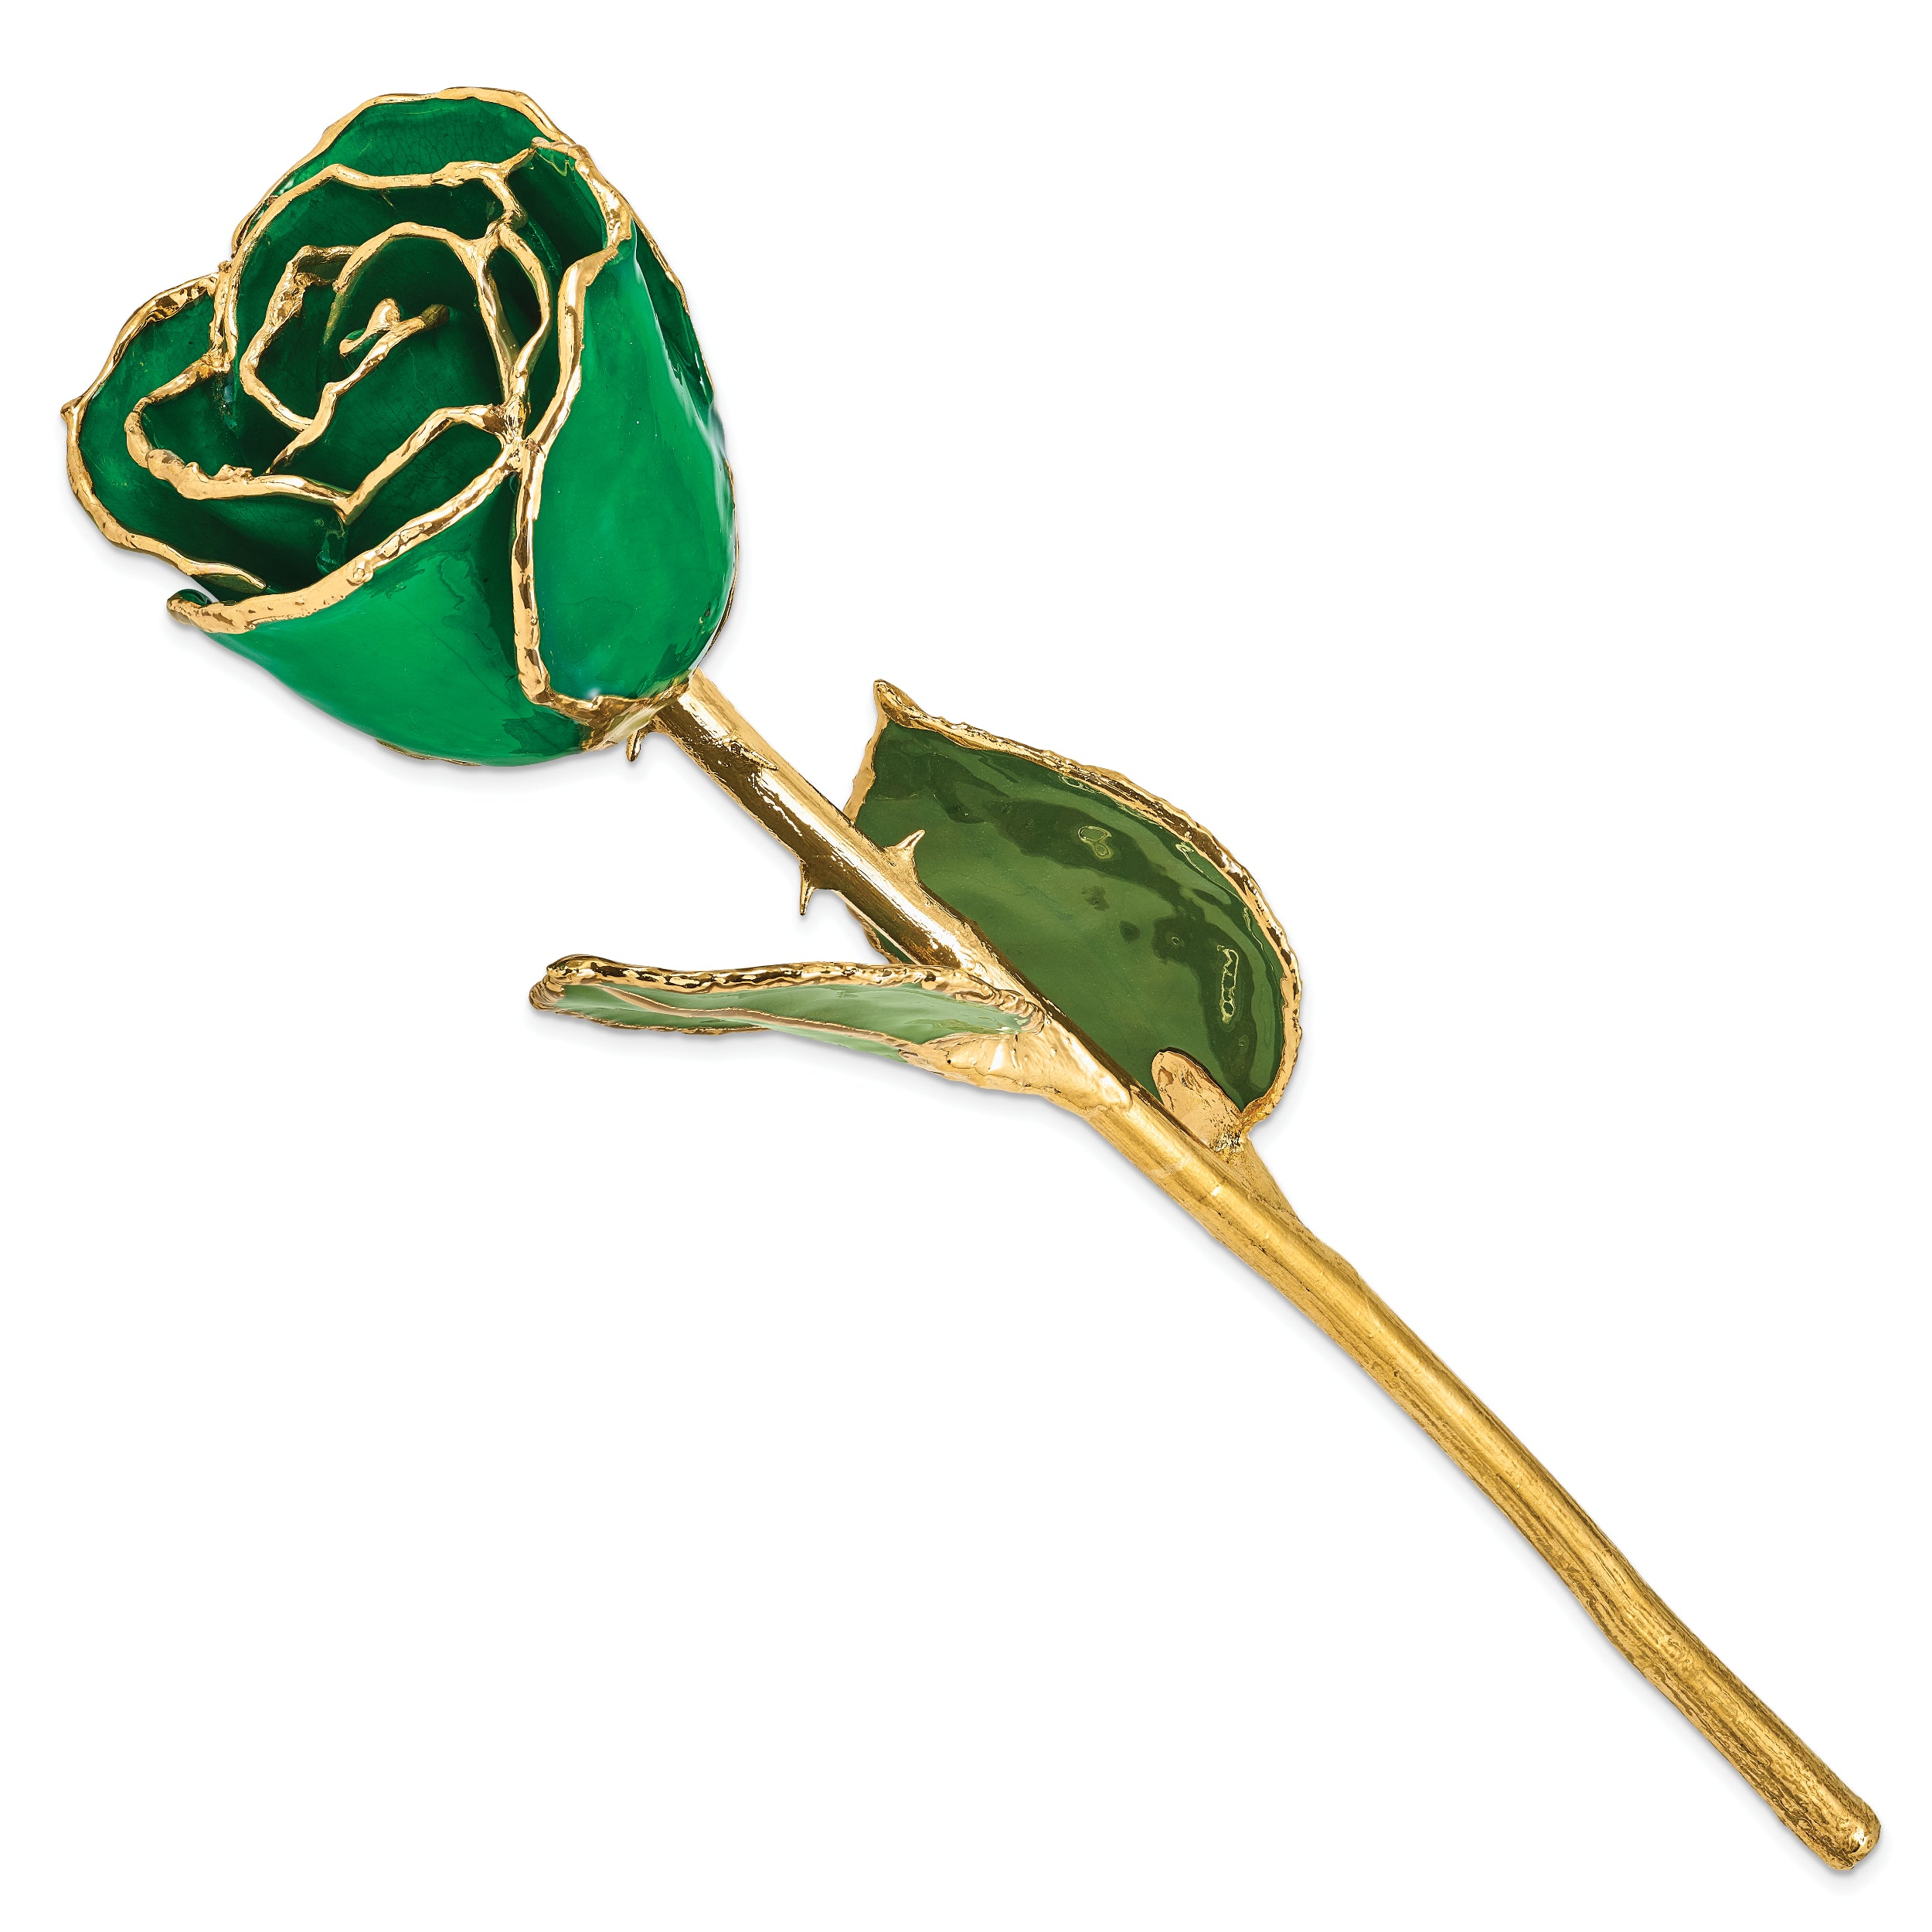 Lacquer Dipped Gold Trim Green Rose